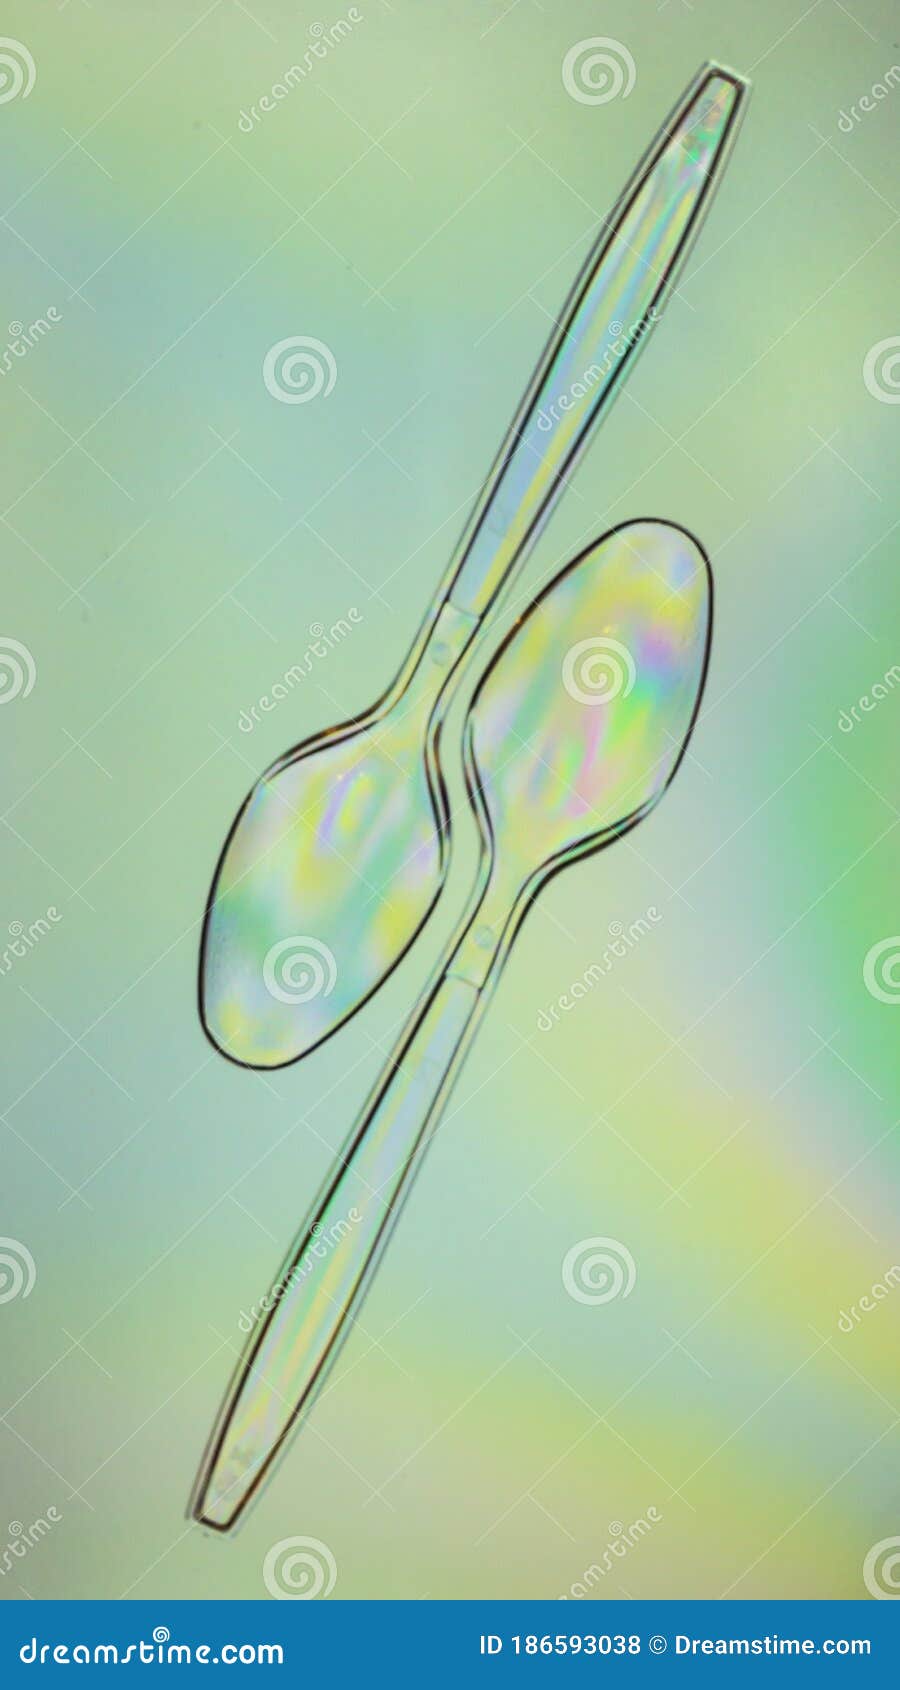 colorful plastic two spoons, elasticity photo